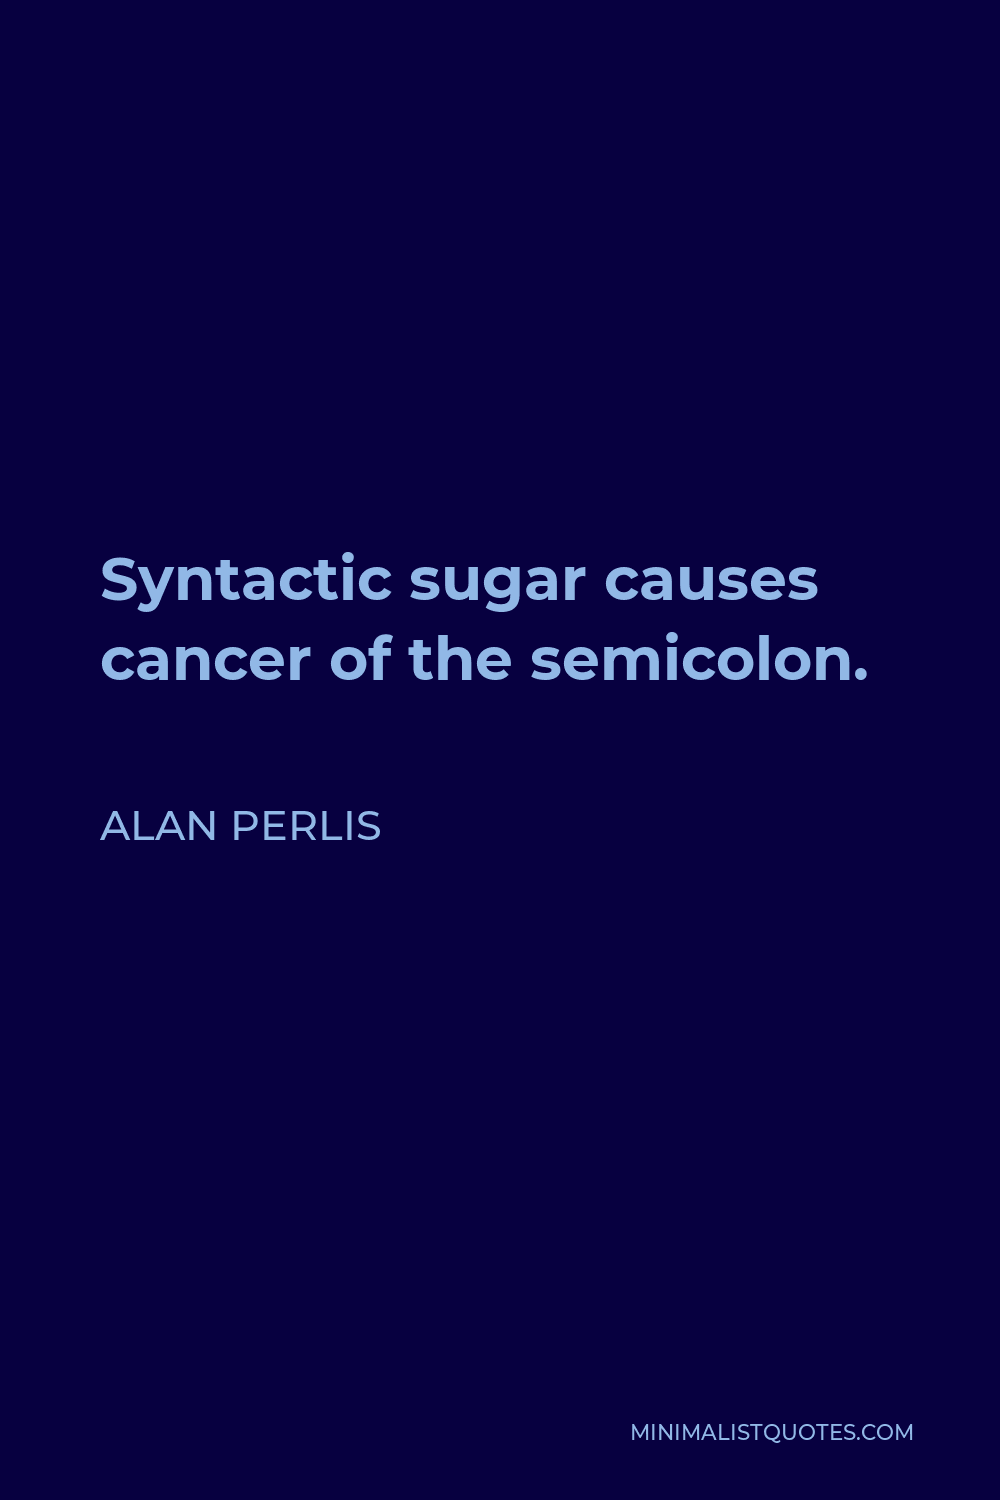 Alan Perlis Quote - Syntactic sugar causes cancer of the semicolon.